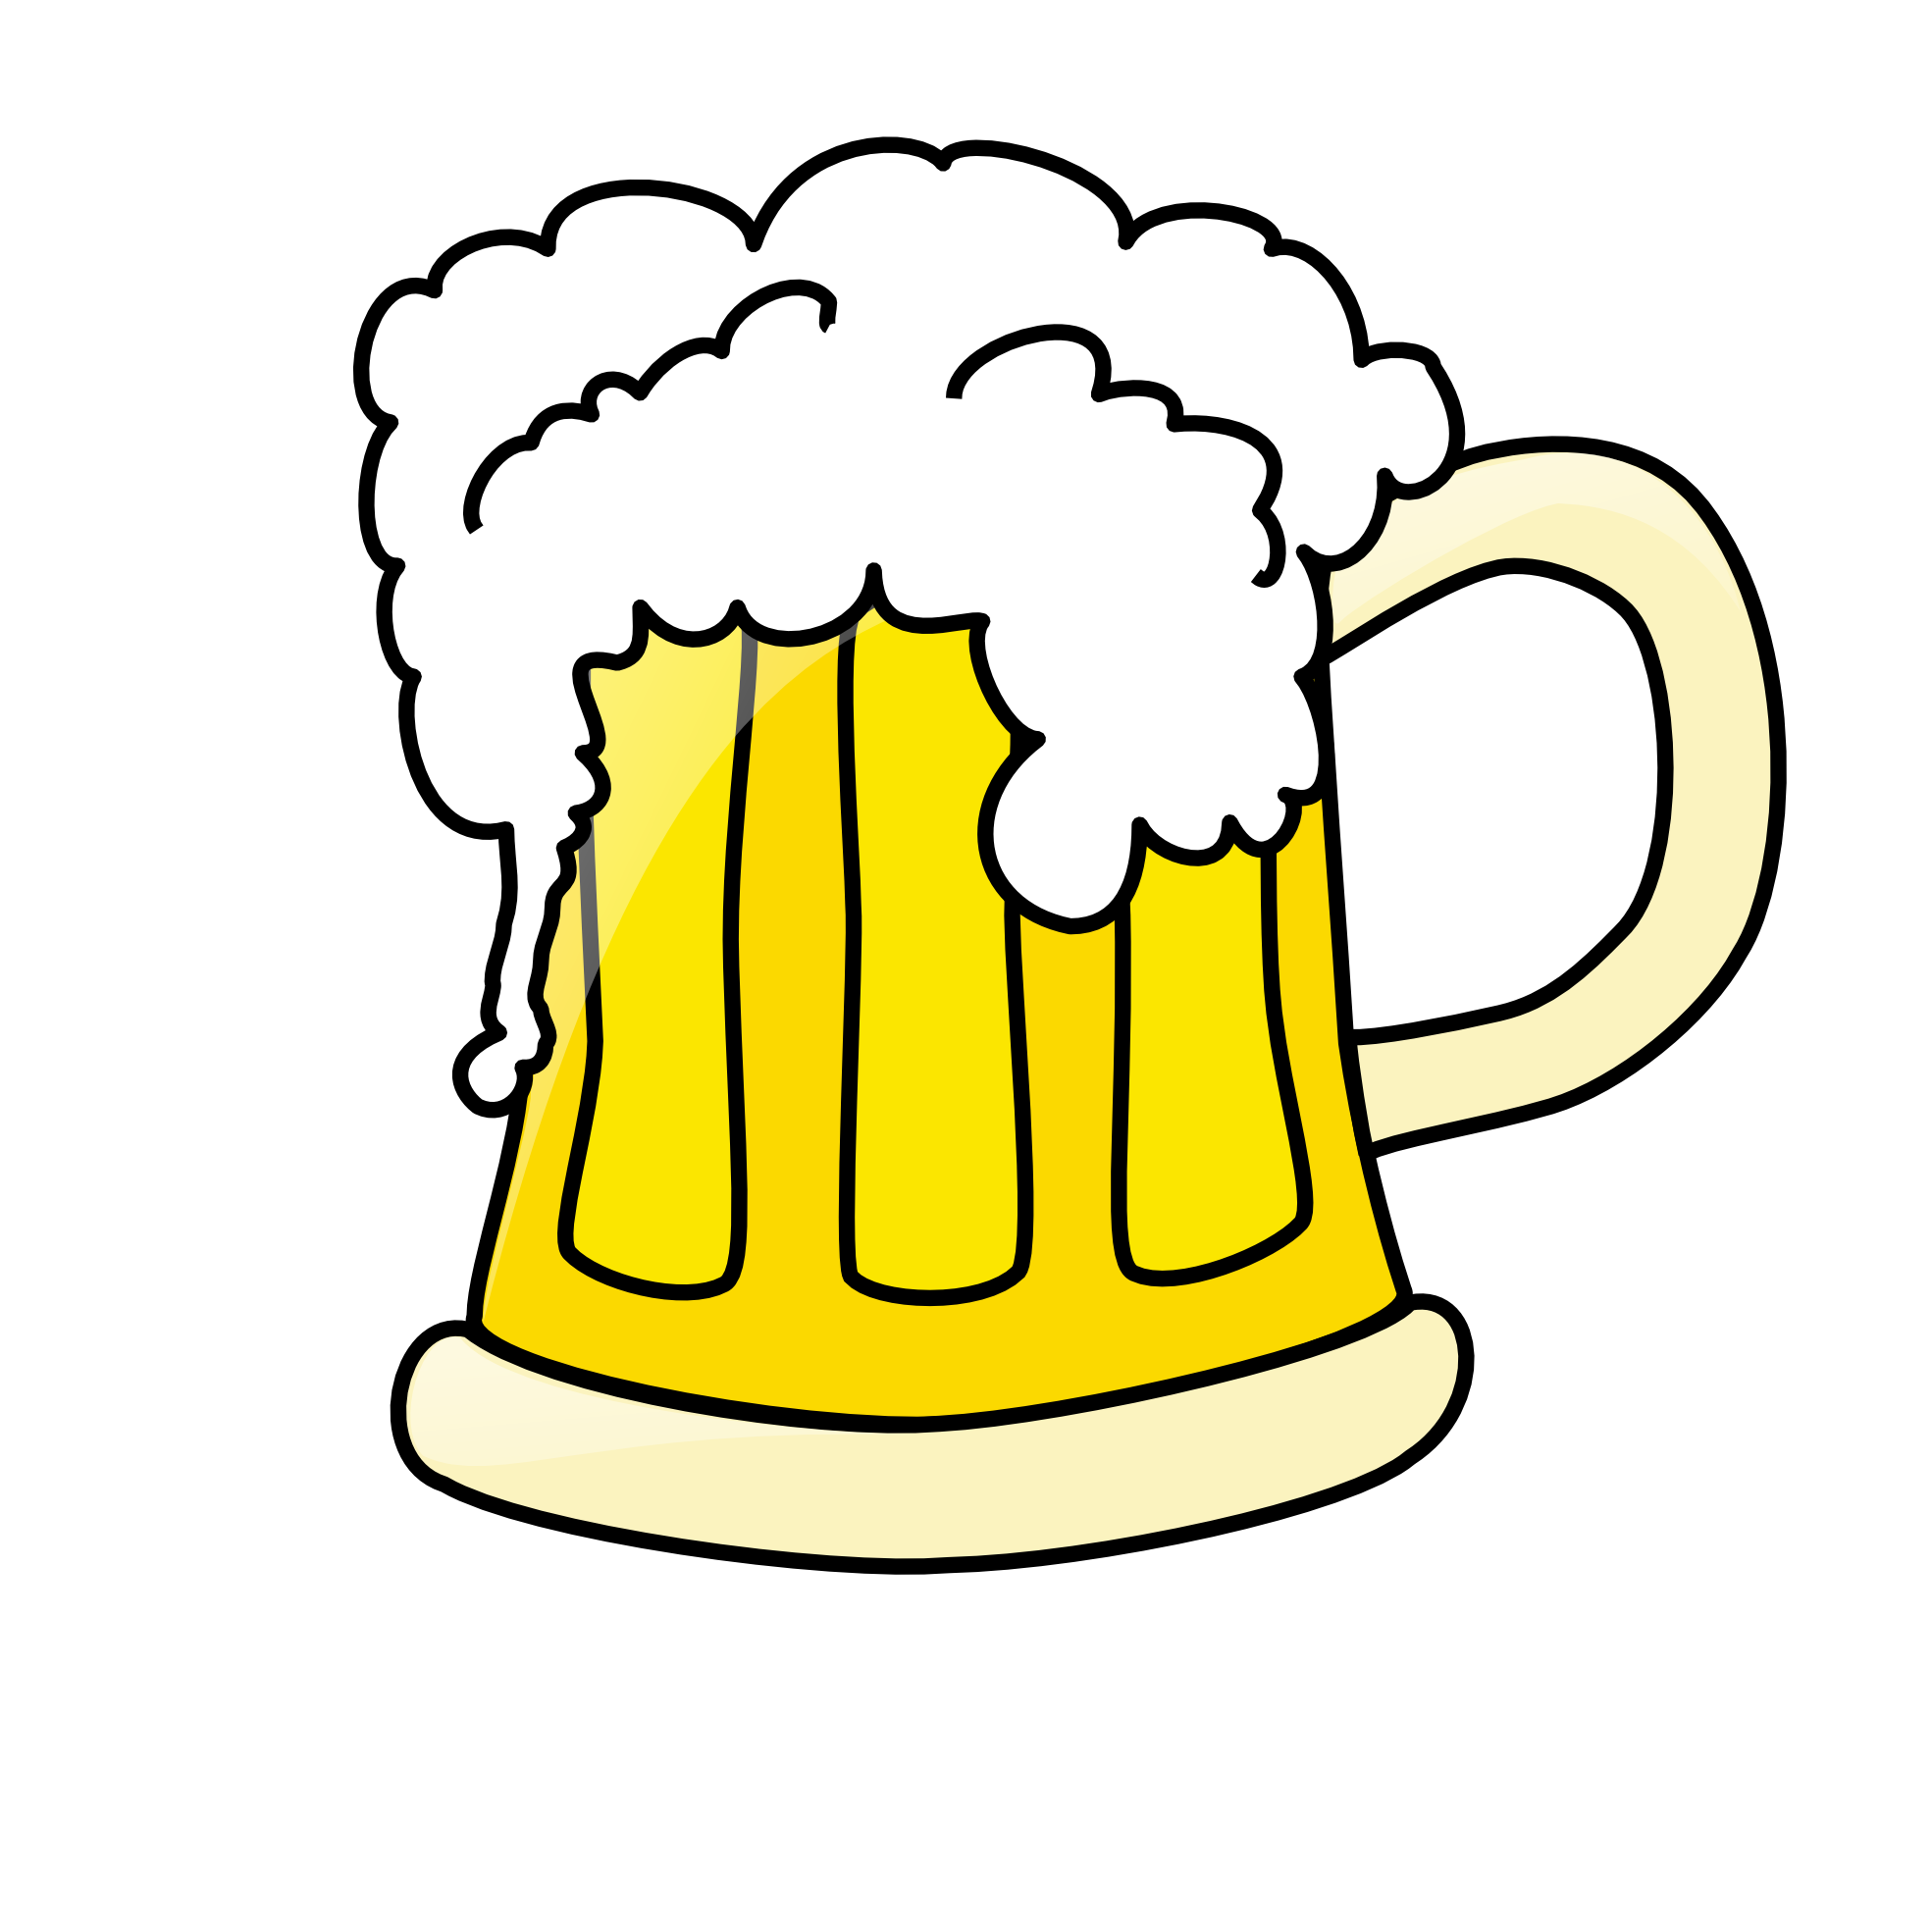 Beer clip art black and white free clipart images 4